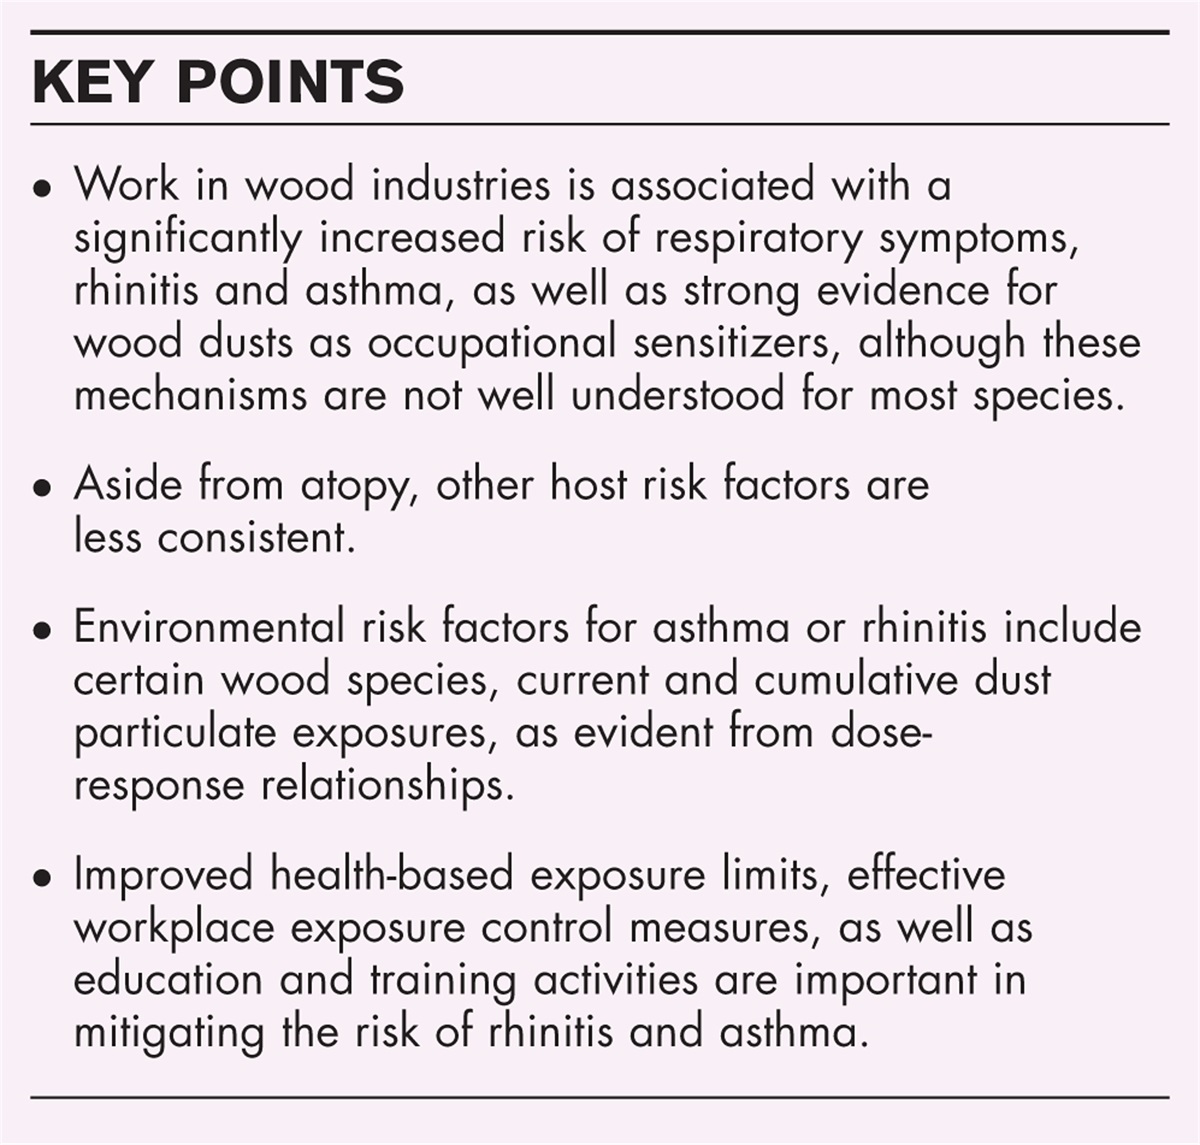 Wood dust and asthma